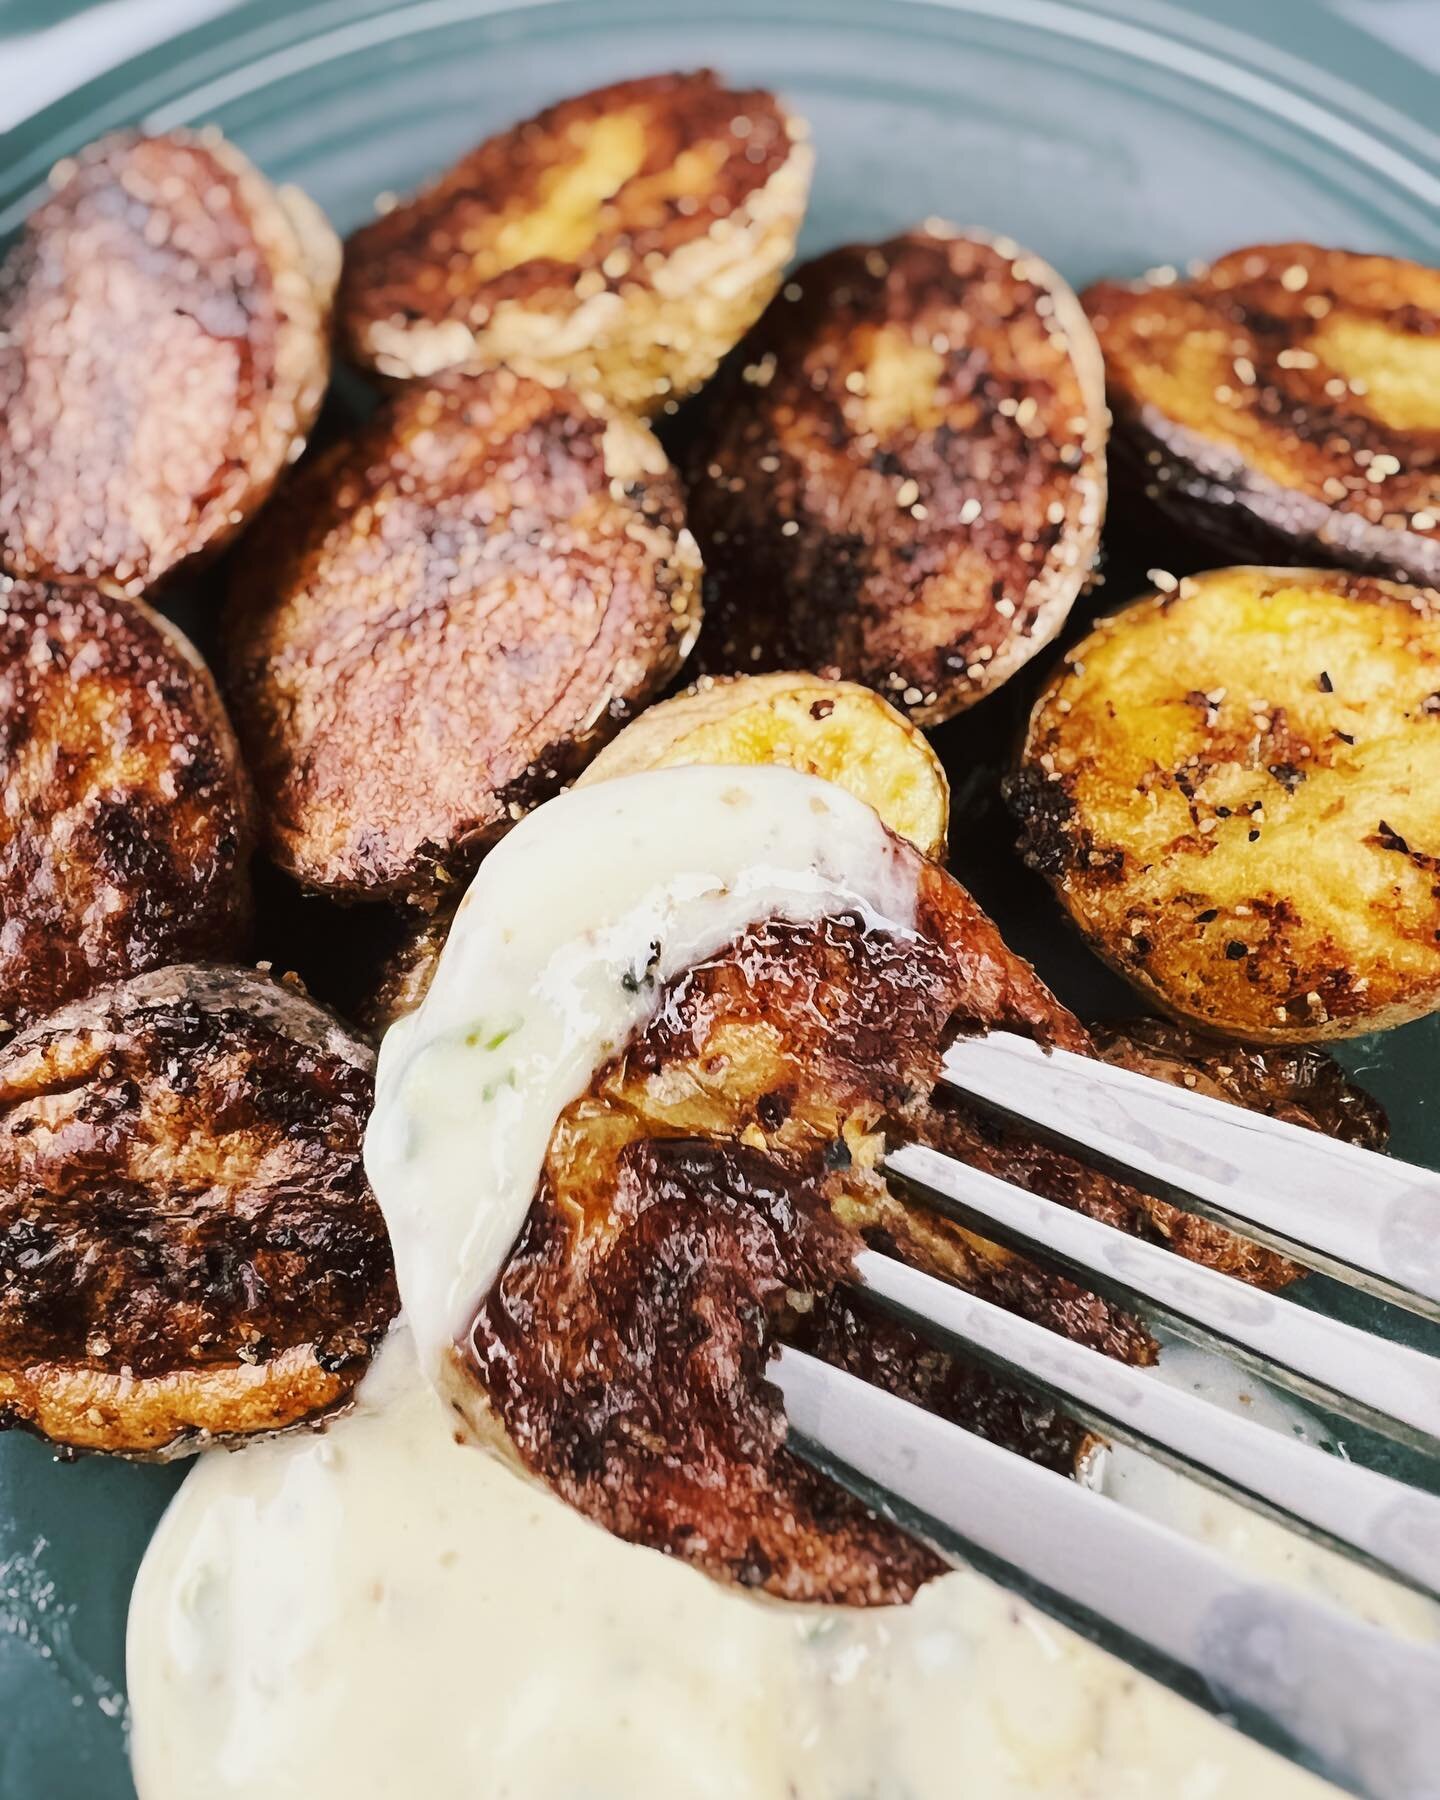 SMASHED GARLIC CRISPY ROASTED BABY POTATOES
This super easy recipe for roasting potatoes is a breeze to make and the flavour and crunch factor is divine. Roasted with smashed garlic cloves and simple seasonings, this is the perfect side dish.  I like